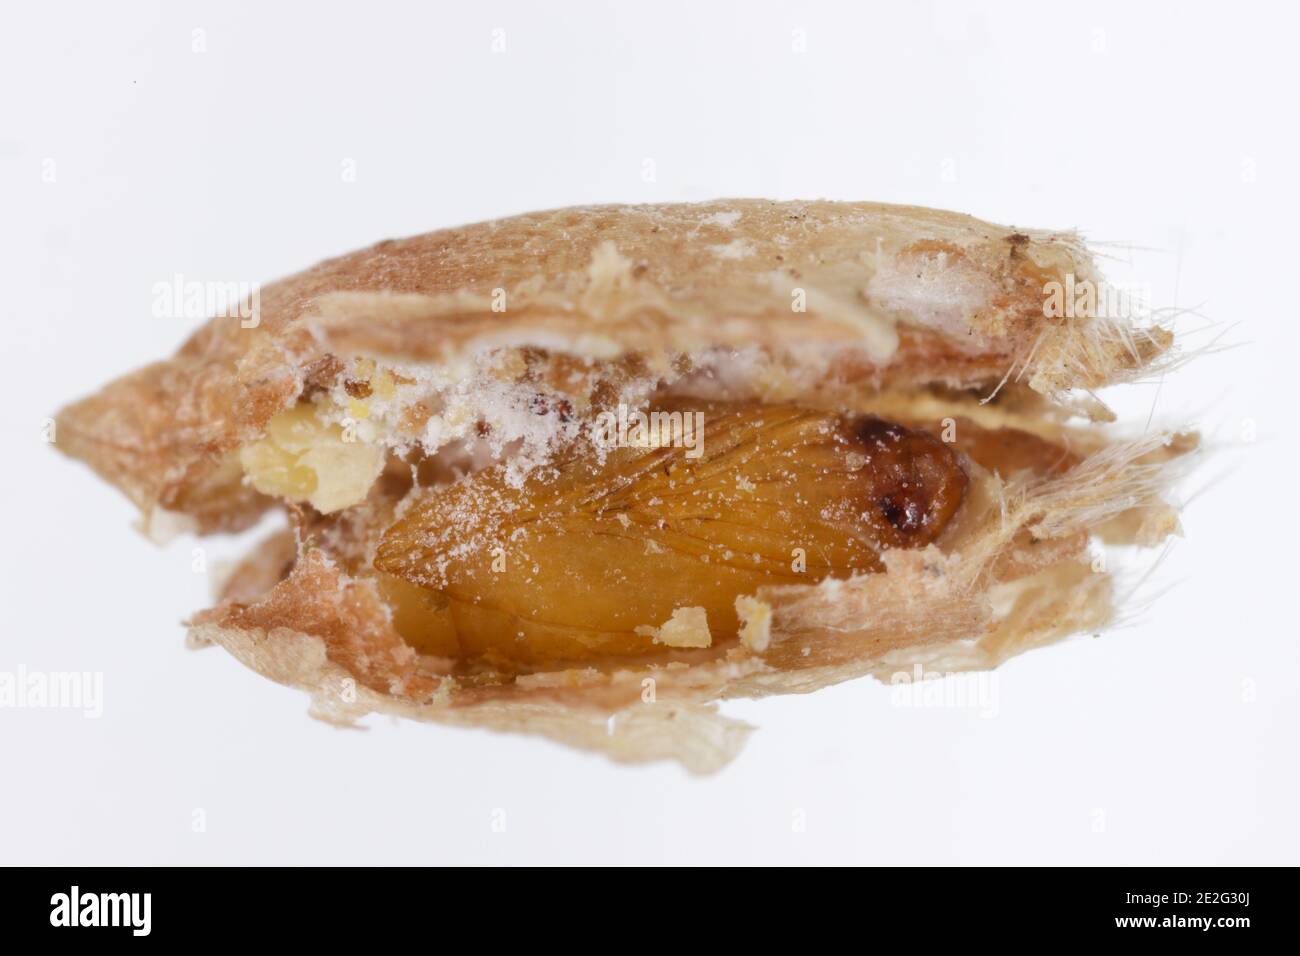 Pupa of the Angoumois grain moth (Sitotroga cerealella) in damaged grain. It is an important pest of stored grains of cereals, maize, rice and others. Stock Photo